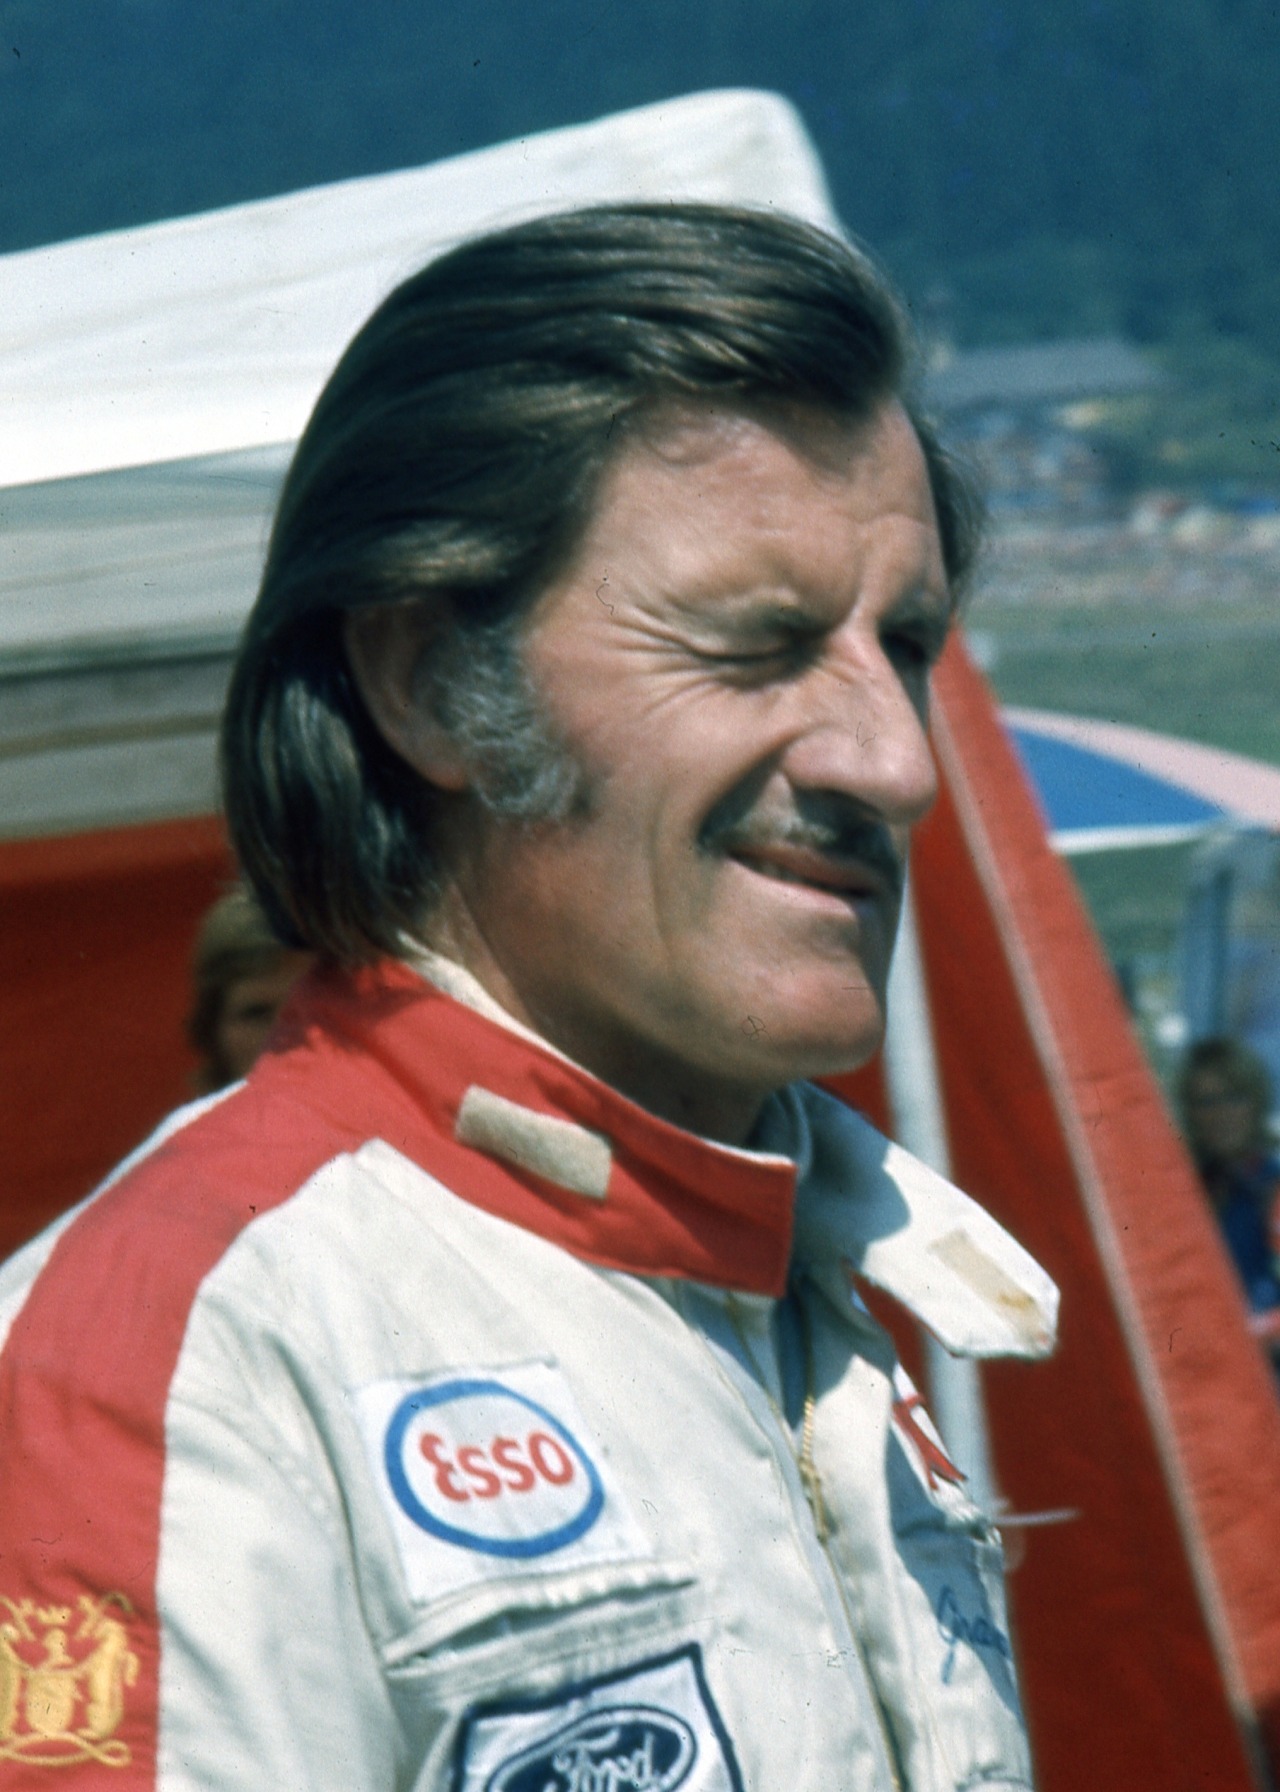 Graham Hill giving us a wink